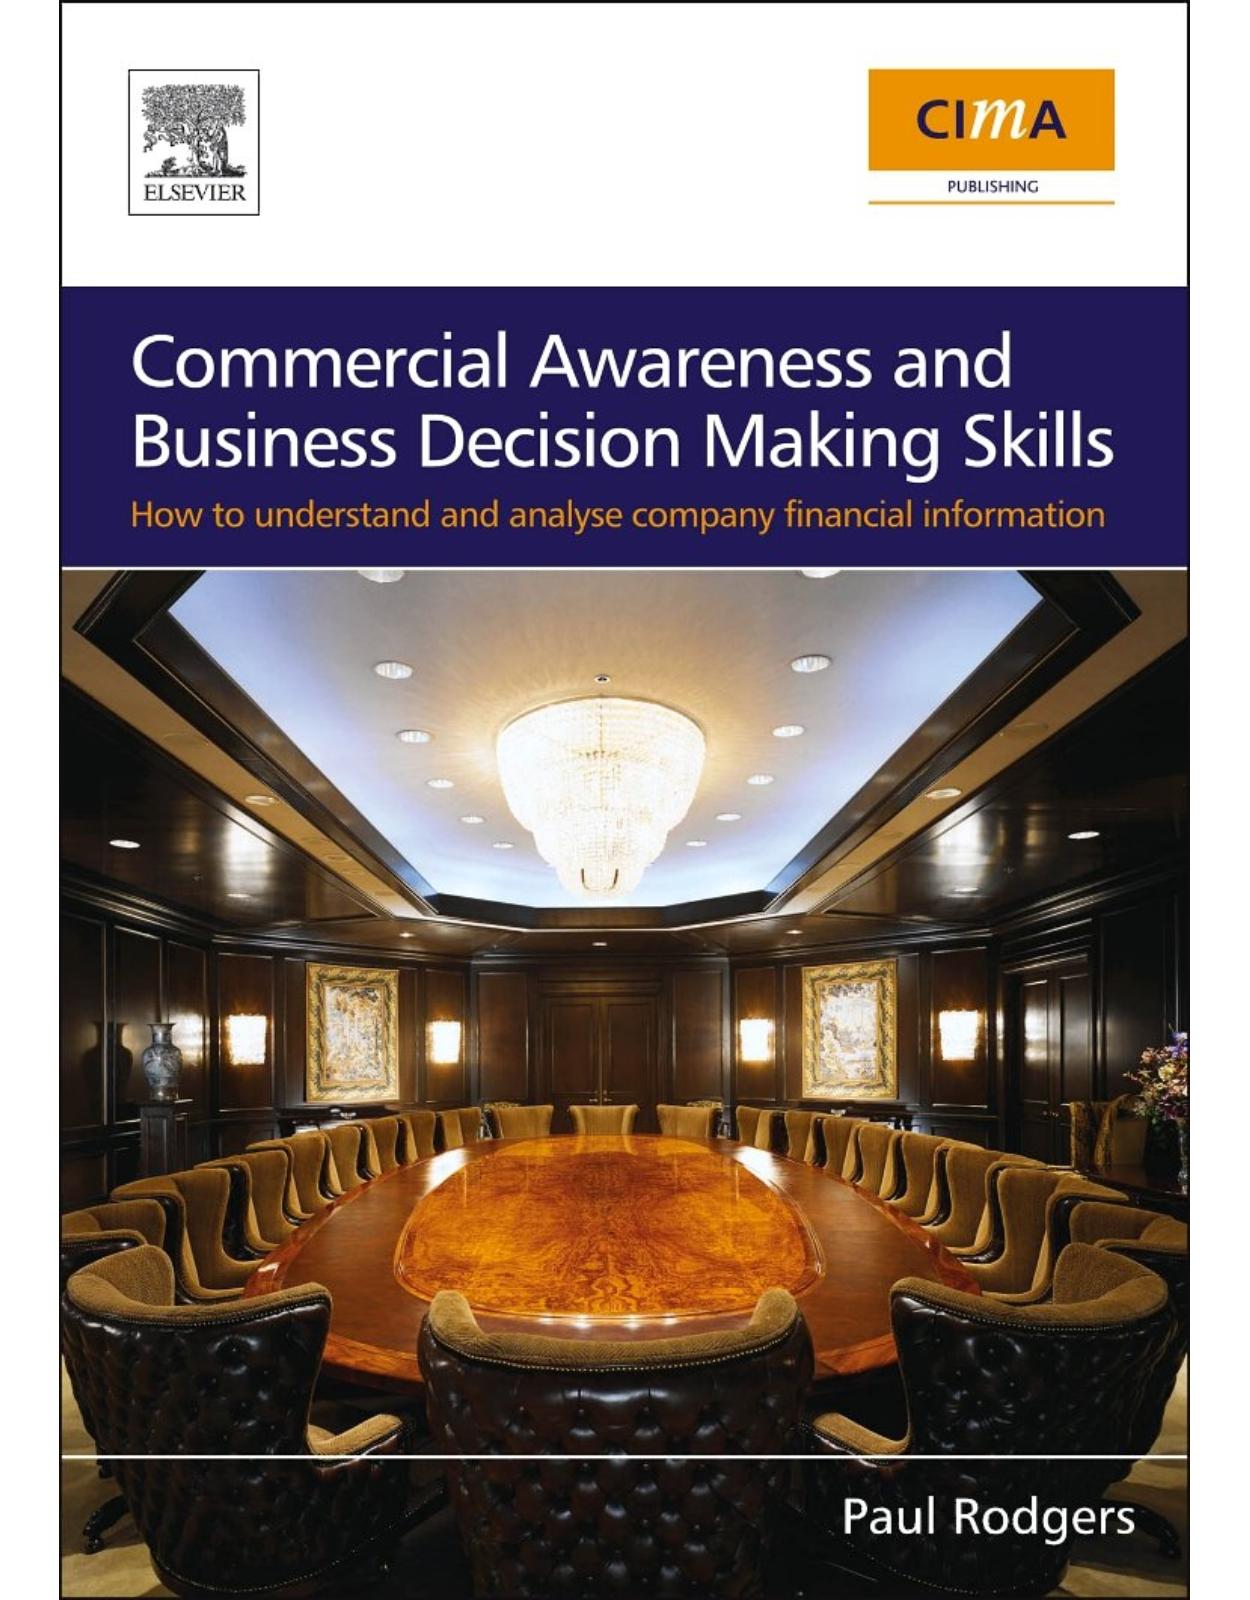 Commercial Awareness and Business Decision Making Skills